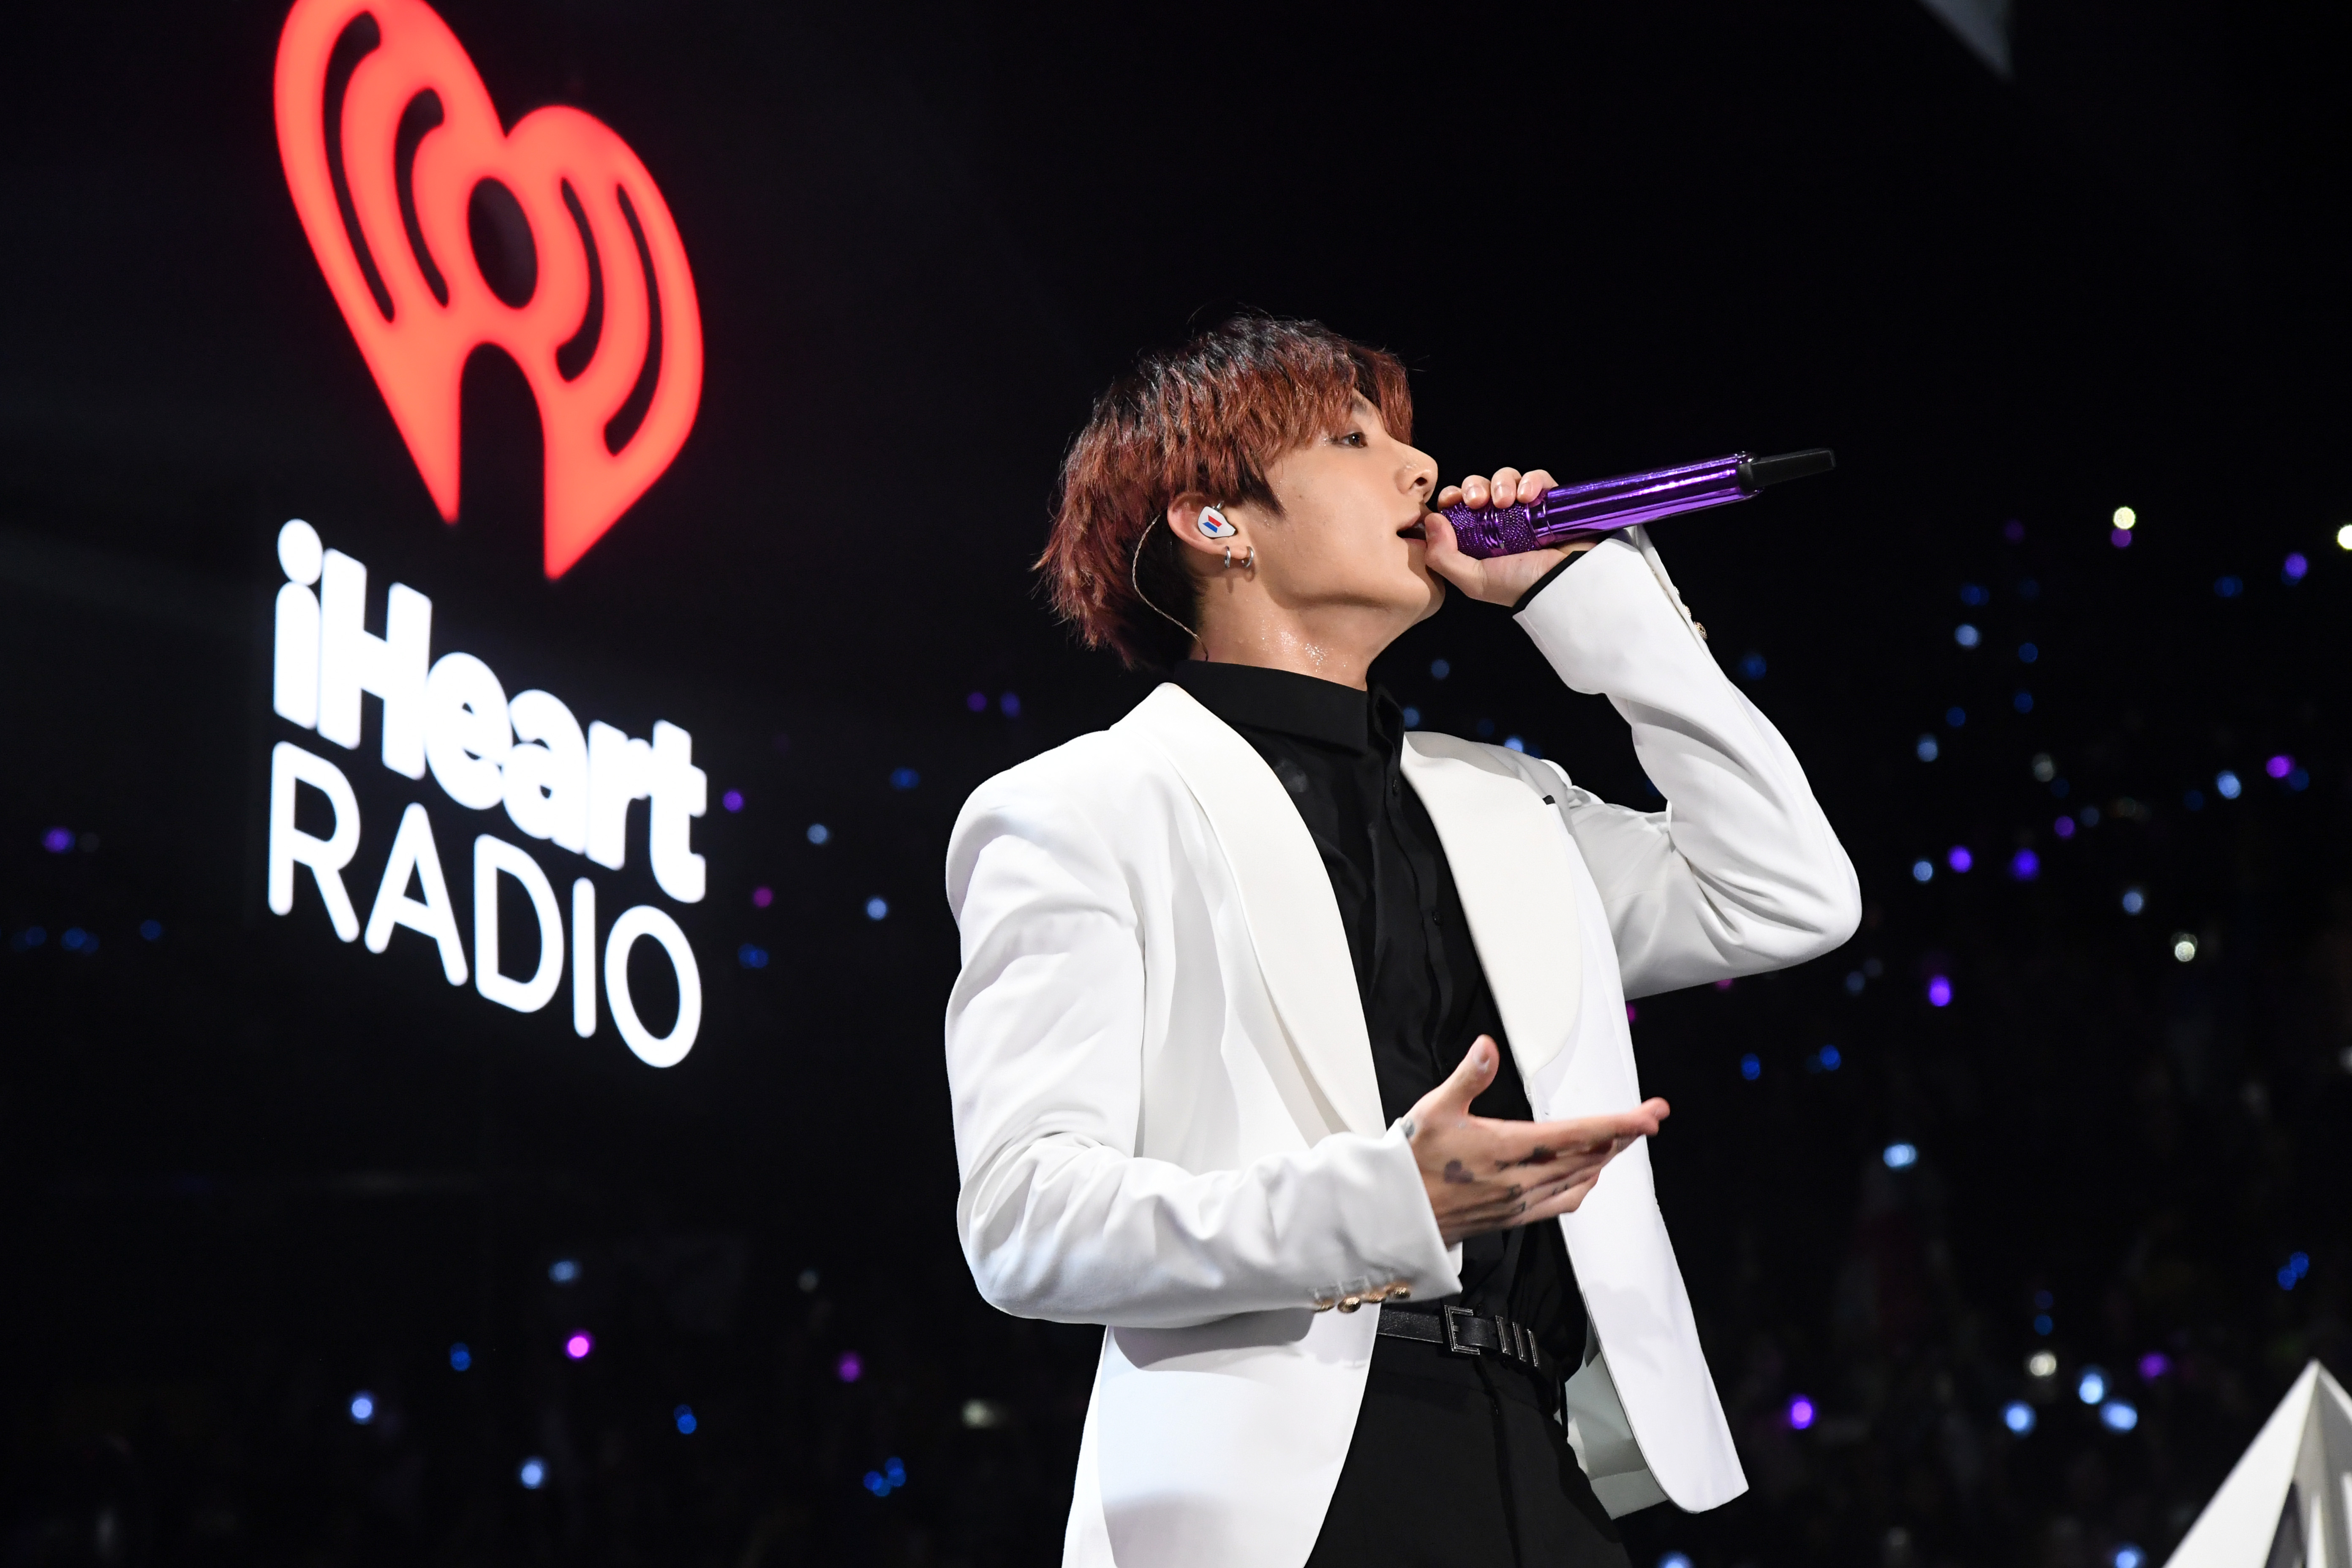 Jungkook of BTS performs on stage during 102.7 KIIS FM's Jingle Ball 2019